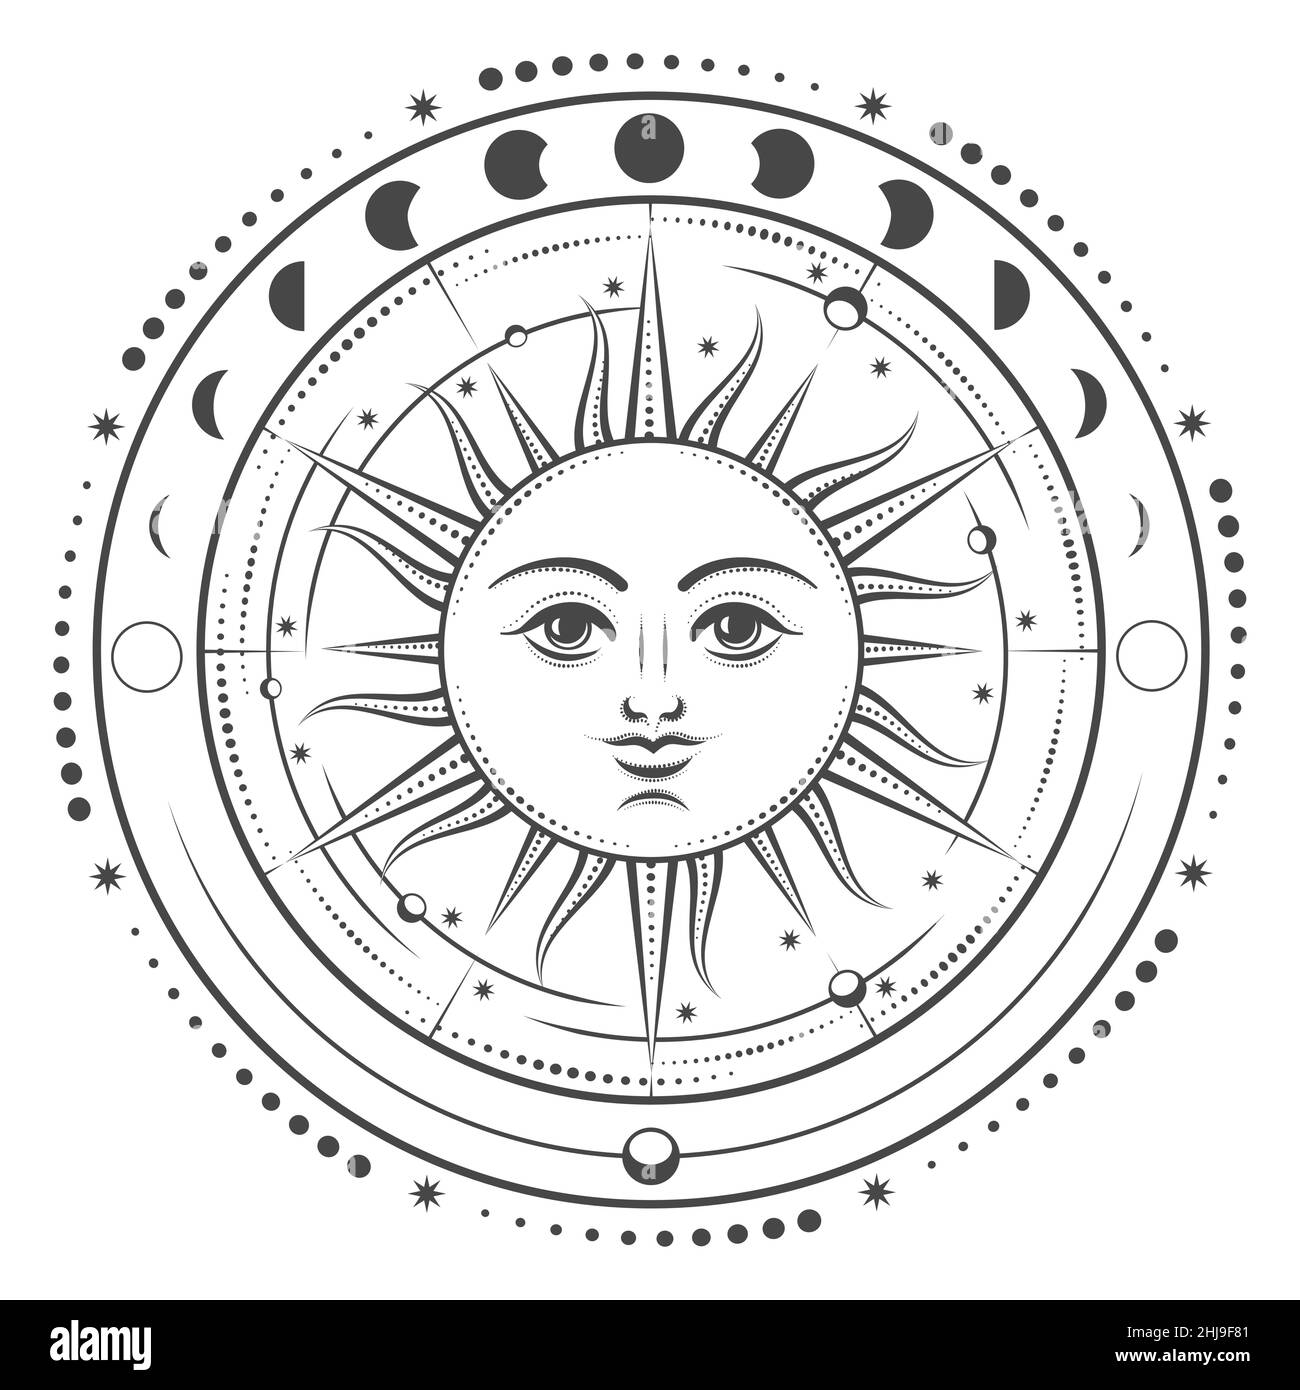 Vintage  hand-draw sun, night sky, moon phase and planets. Sacred Geometry, Magic, Esoteric Philosophies, tattoo art isolated on white. Vector illustr Stock Vector